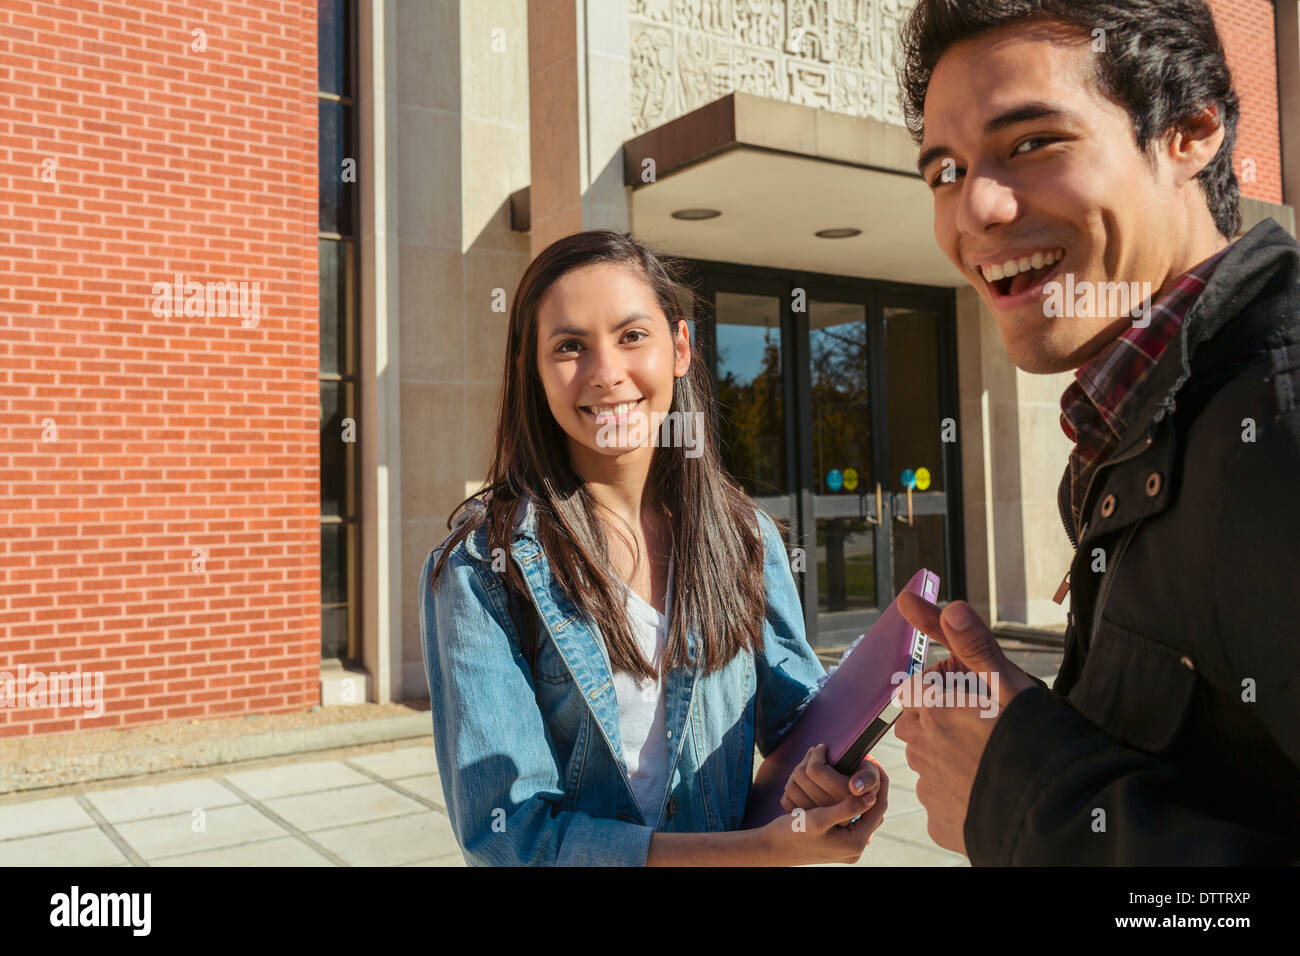 Students smiling on campus Stock Photo